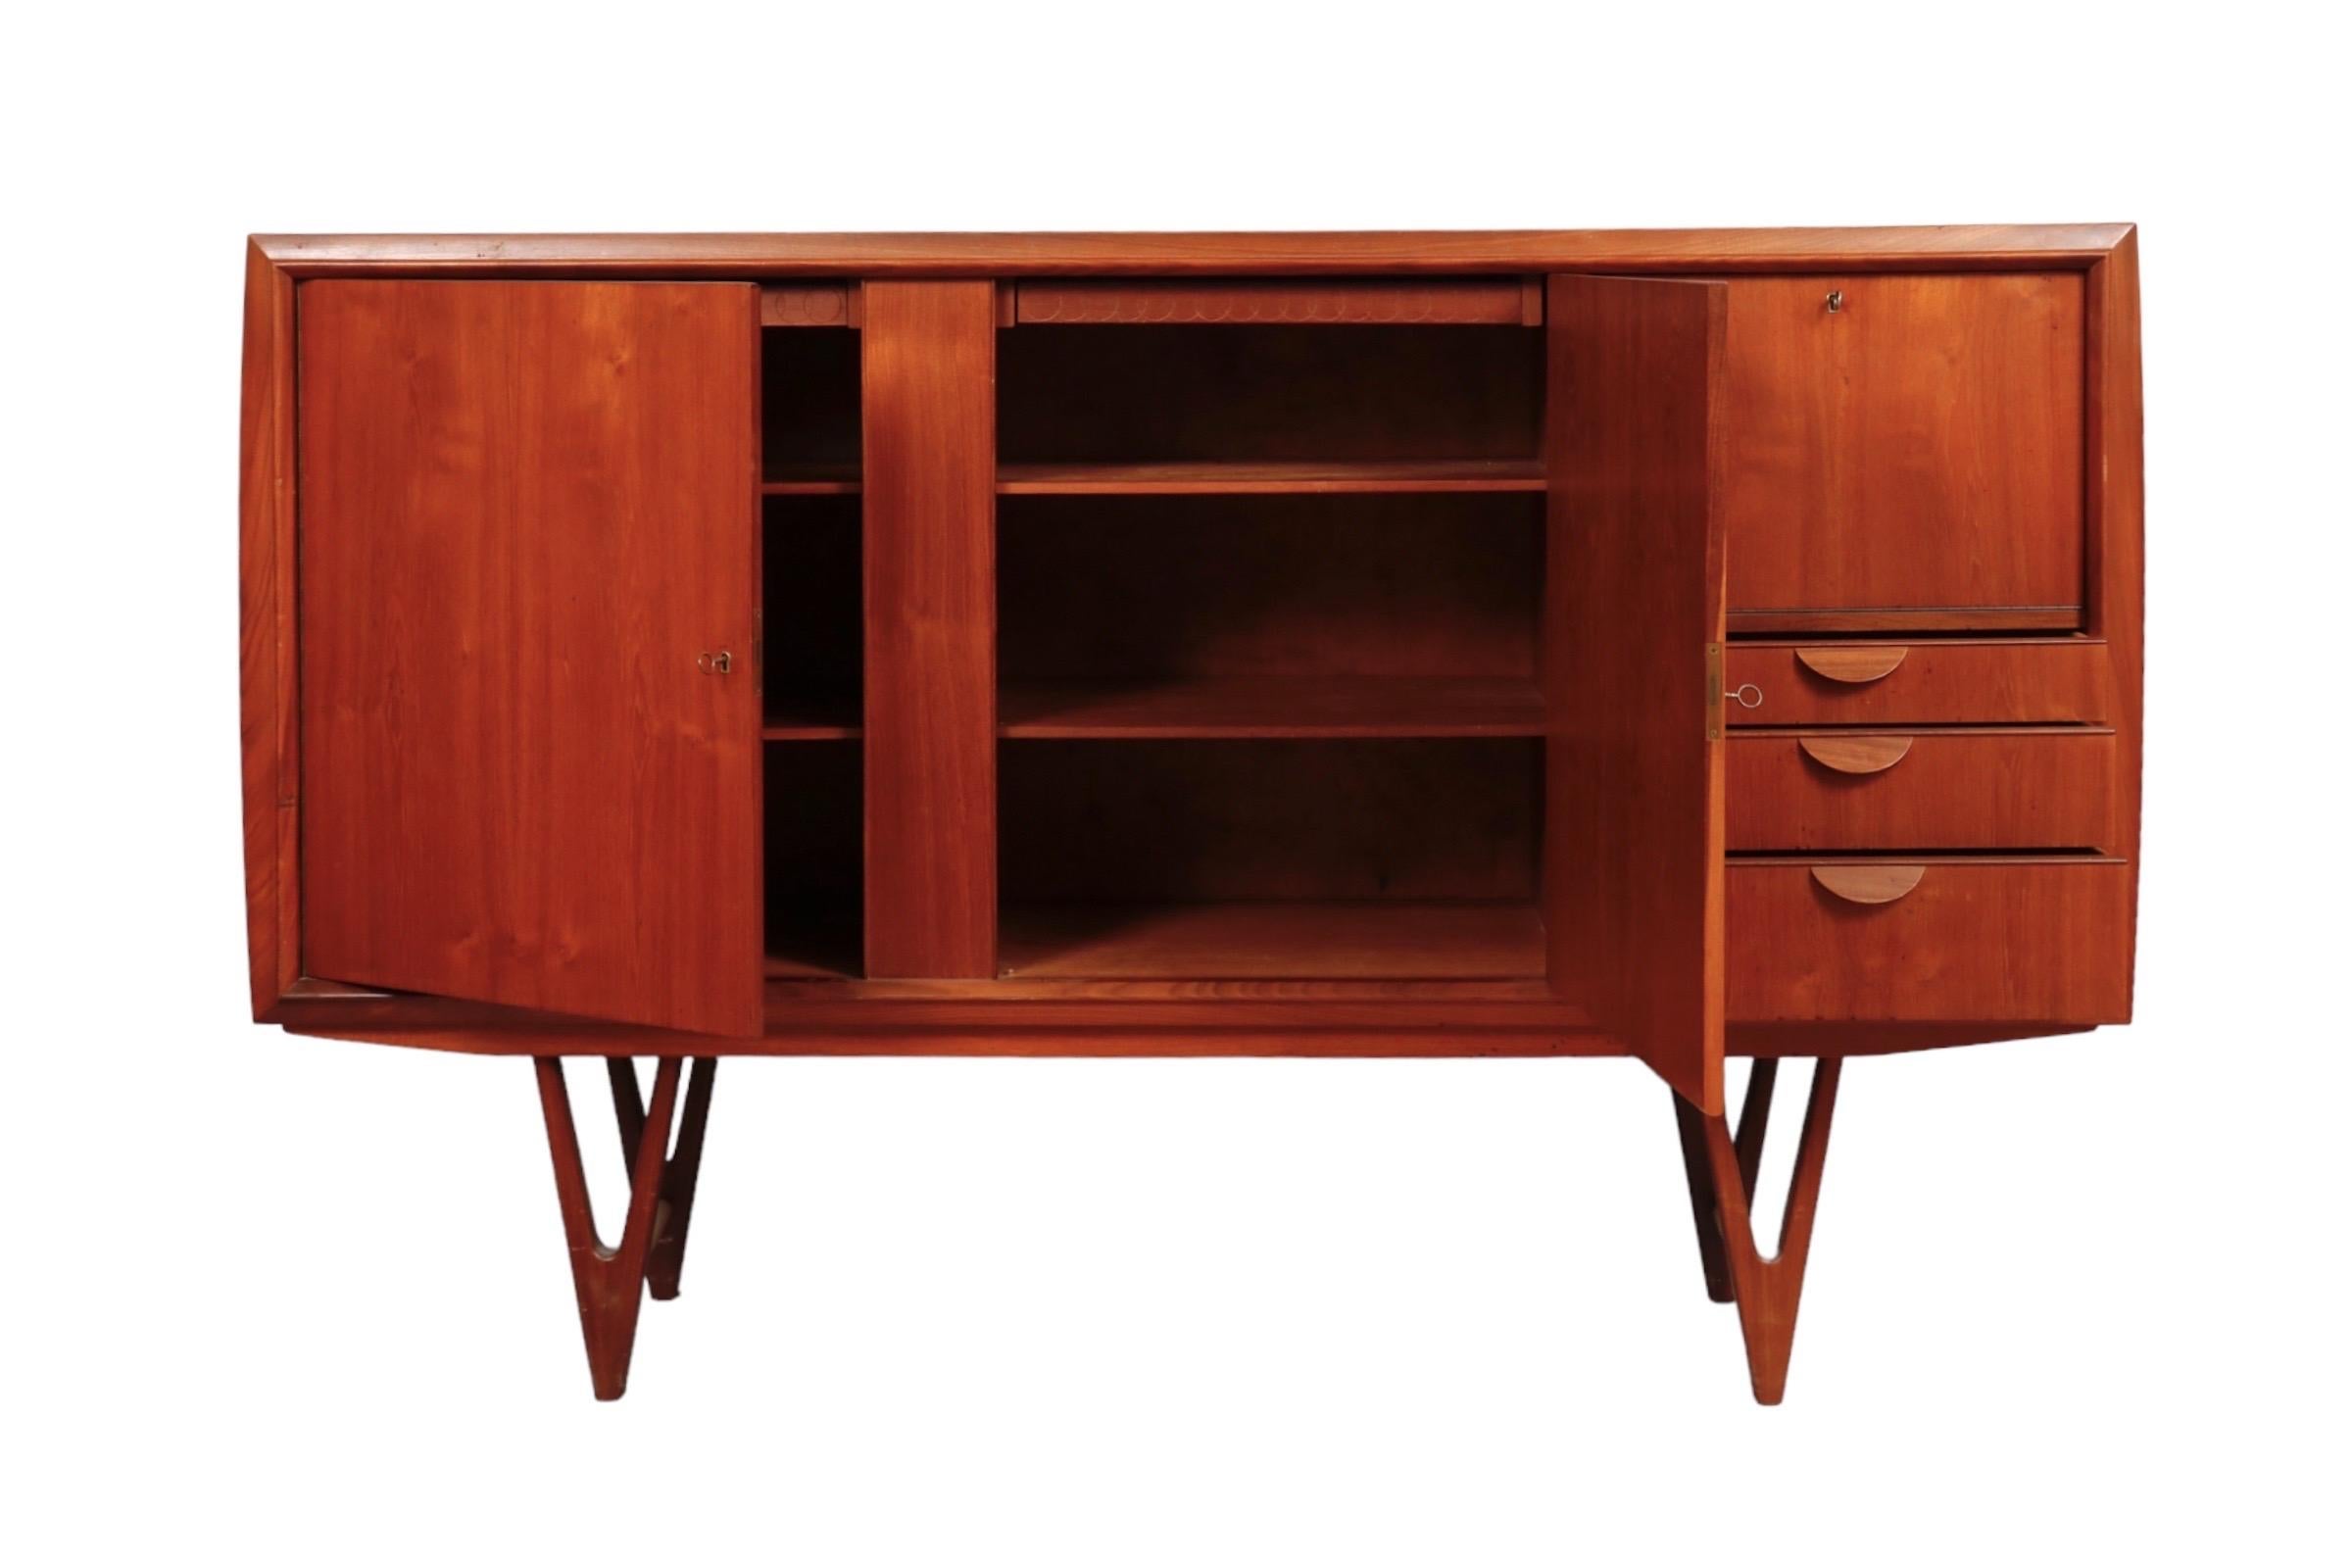 Mid-century teak Credenza bar with drawers and bar area with a mirror in the back. 

Dimensions: 
W 71” x D 18” x H 47” inches.